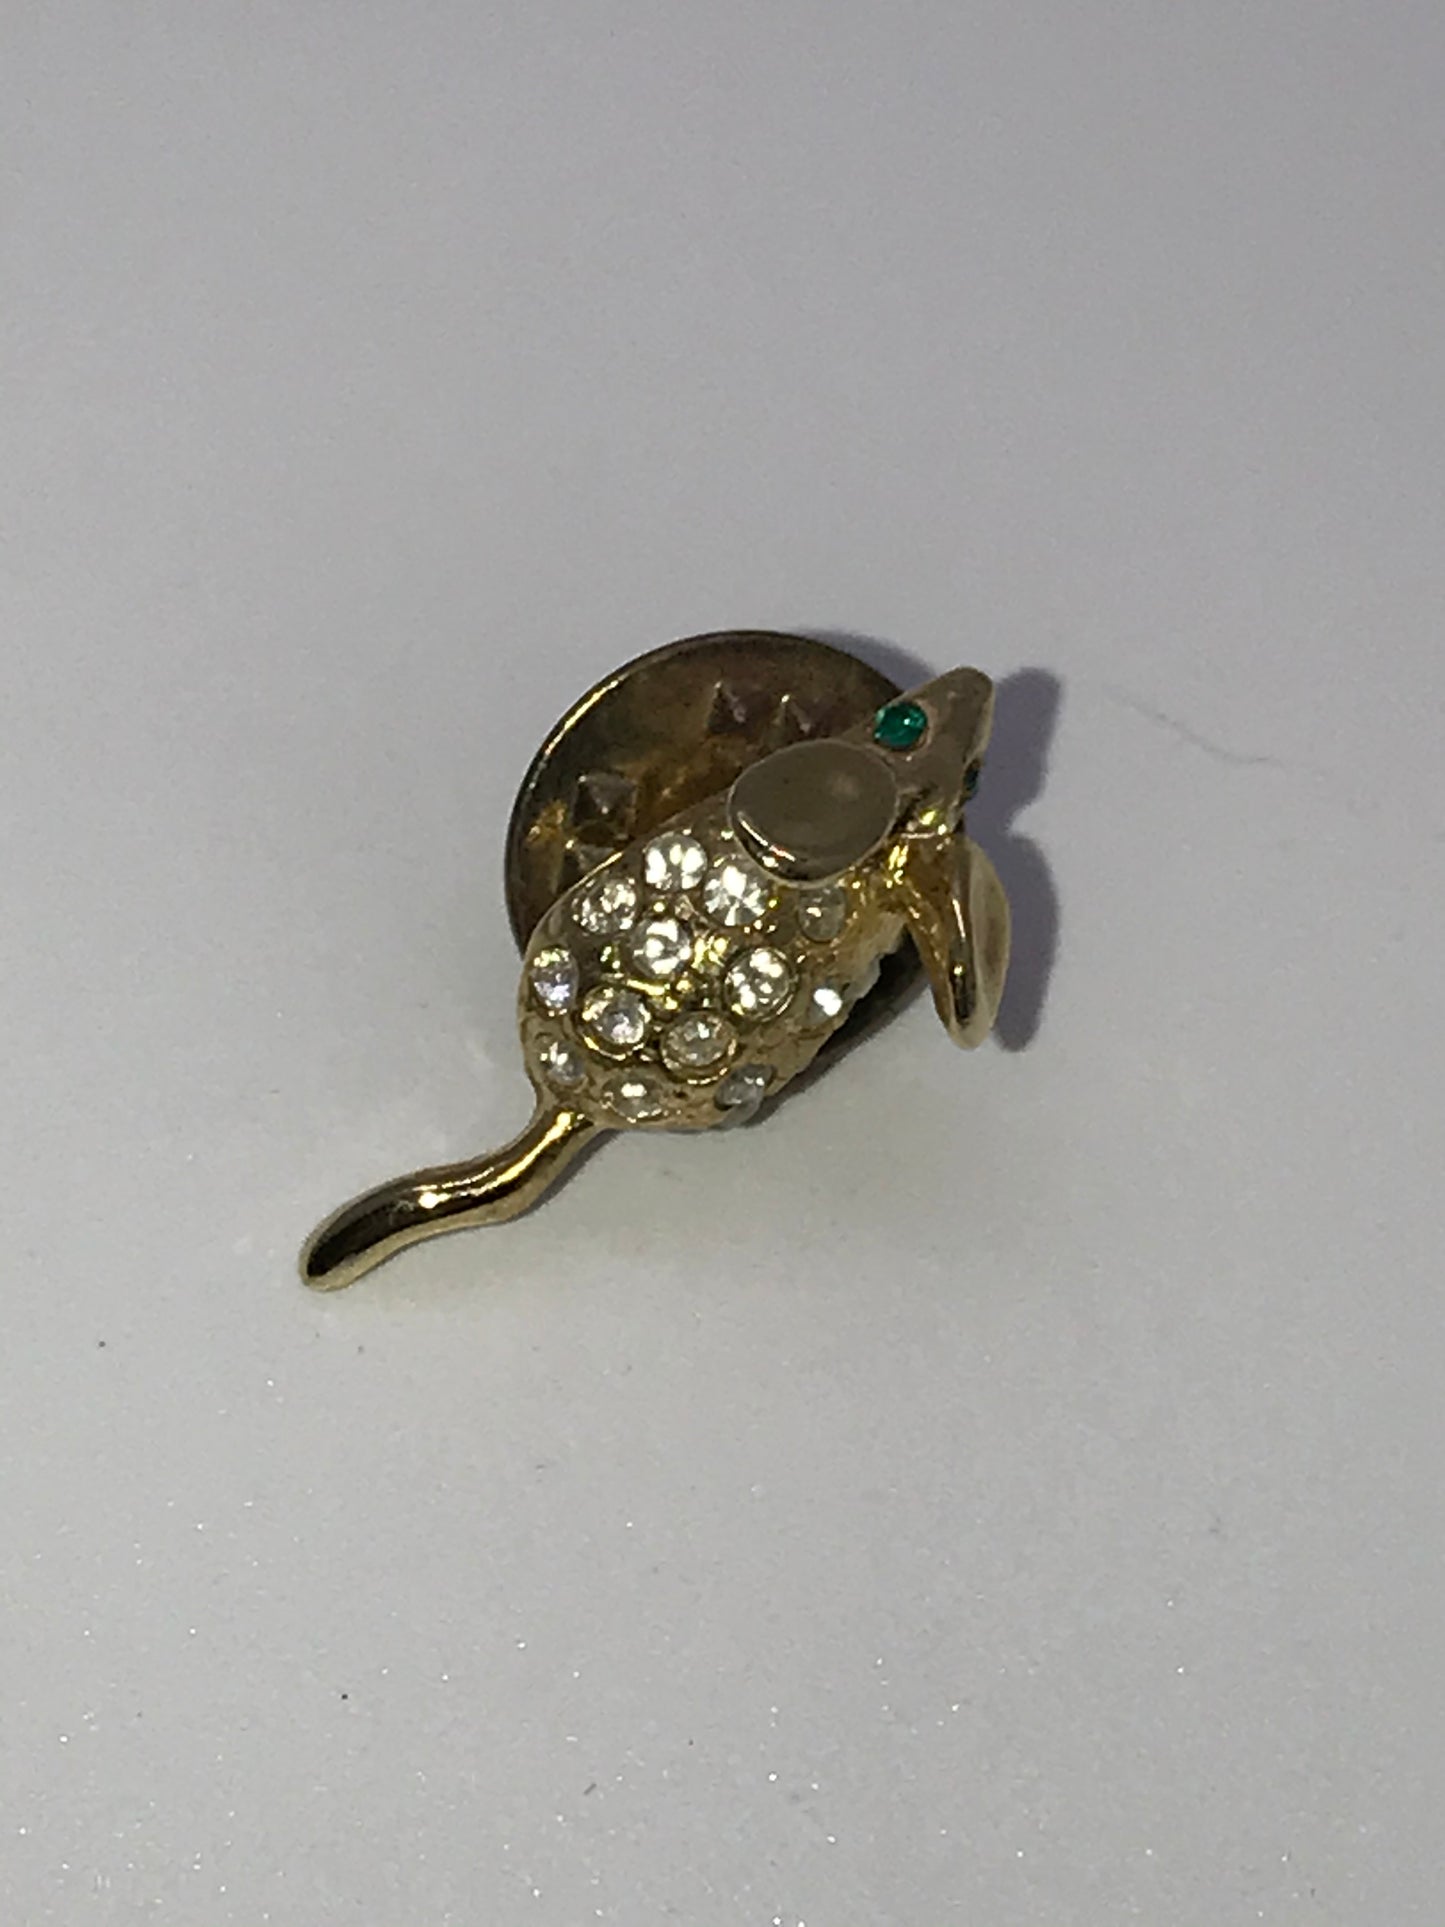 Sphinx Jewelry Co. Rhinestone Encrusted 3D Gold tone Mouse Pin